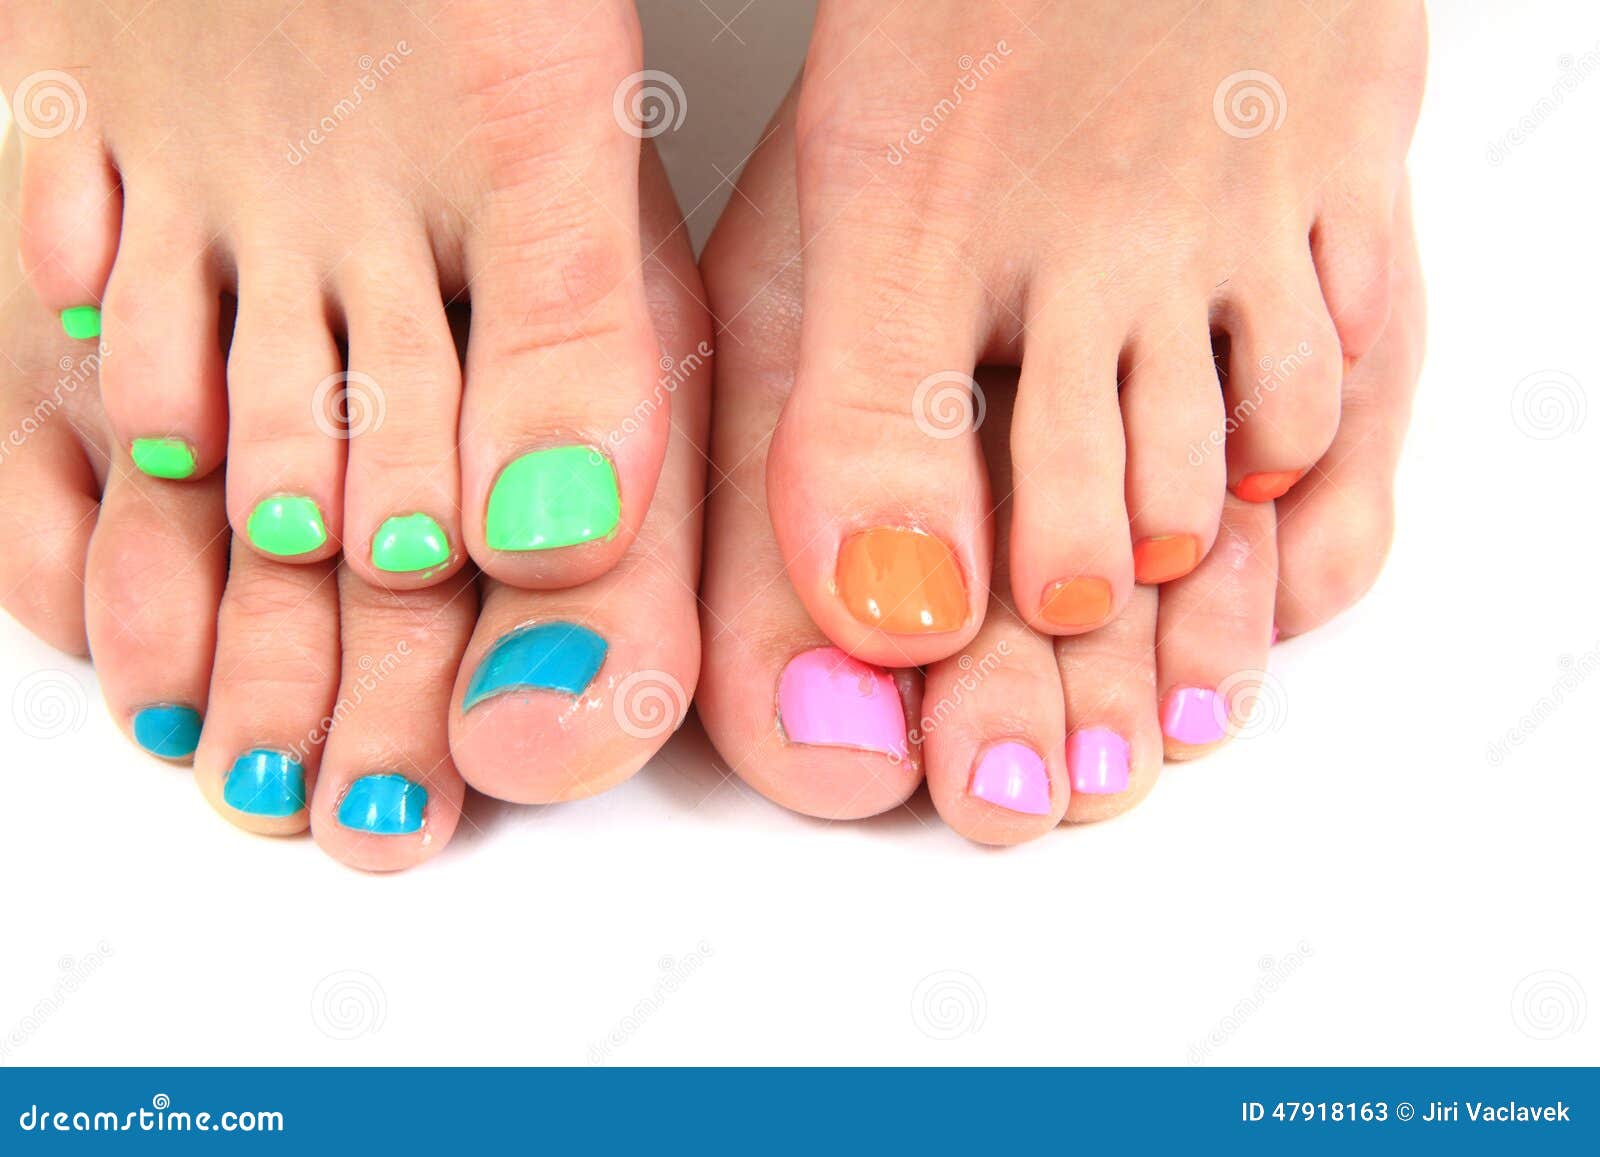 nail and feet coloring pages - photo #25